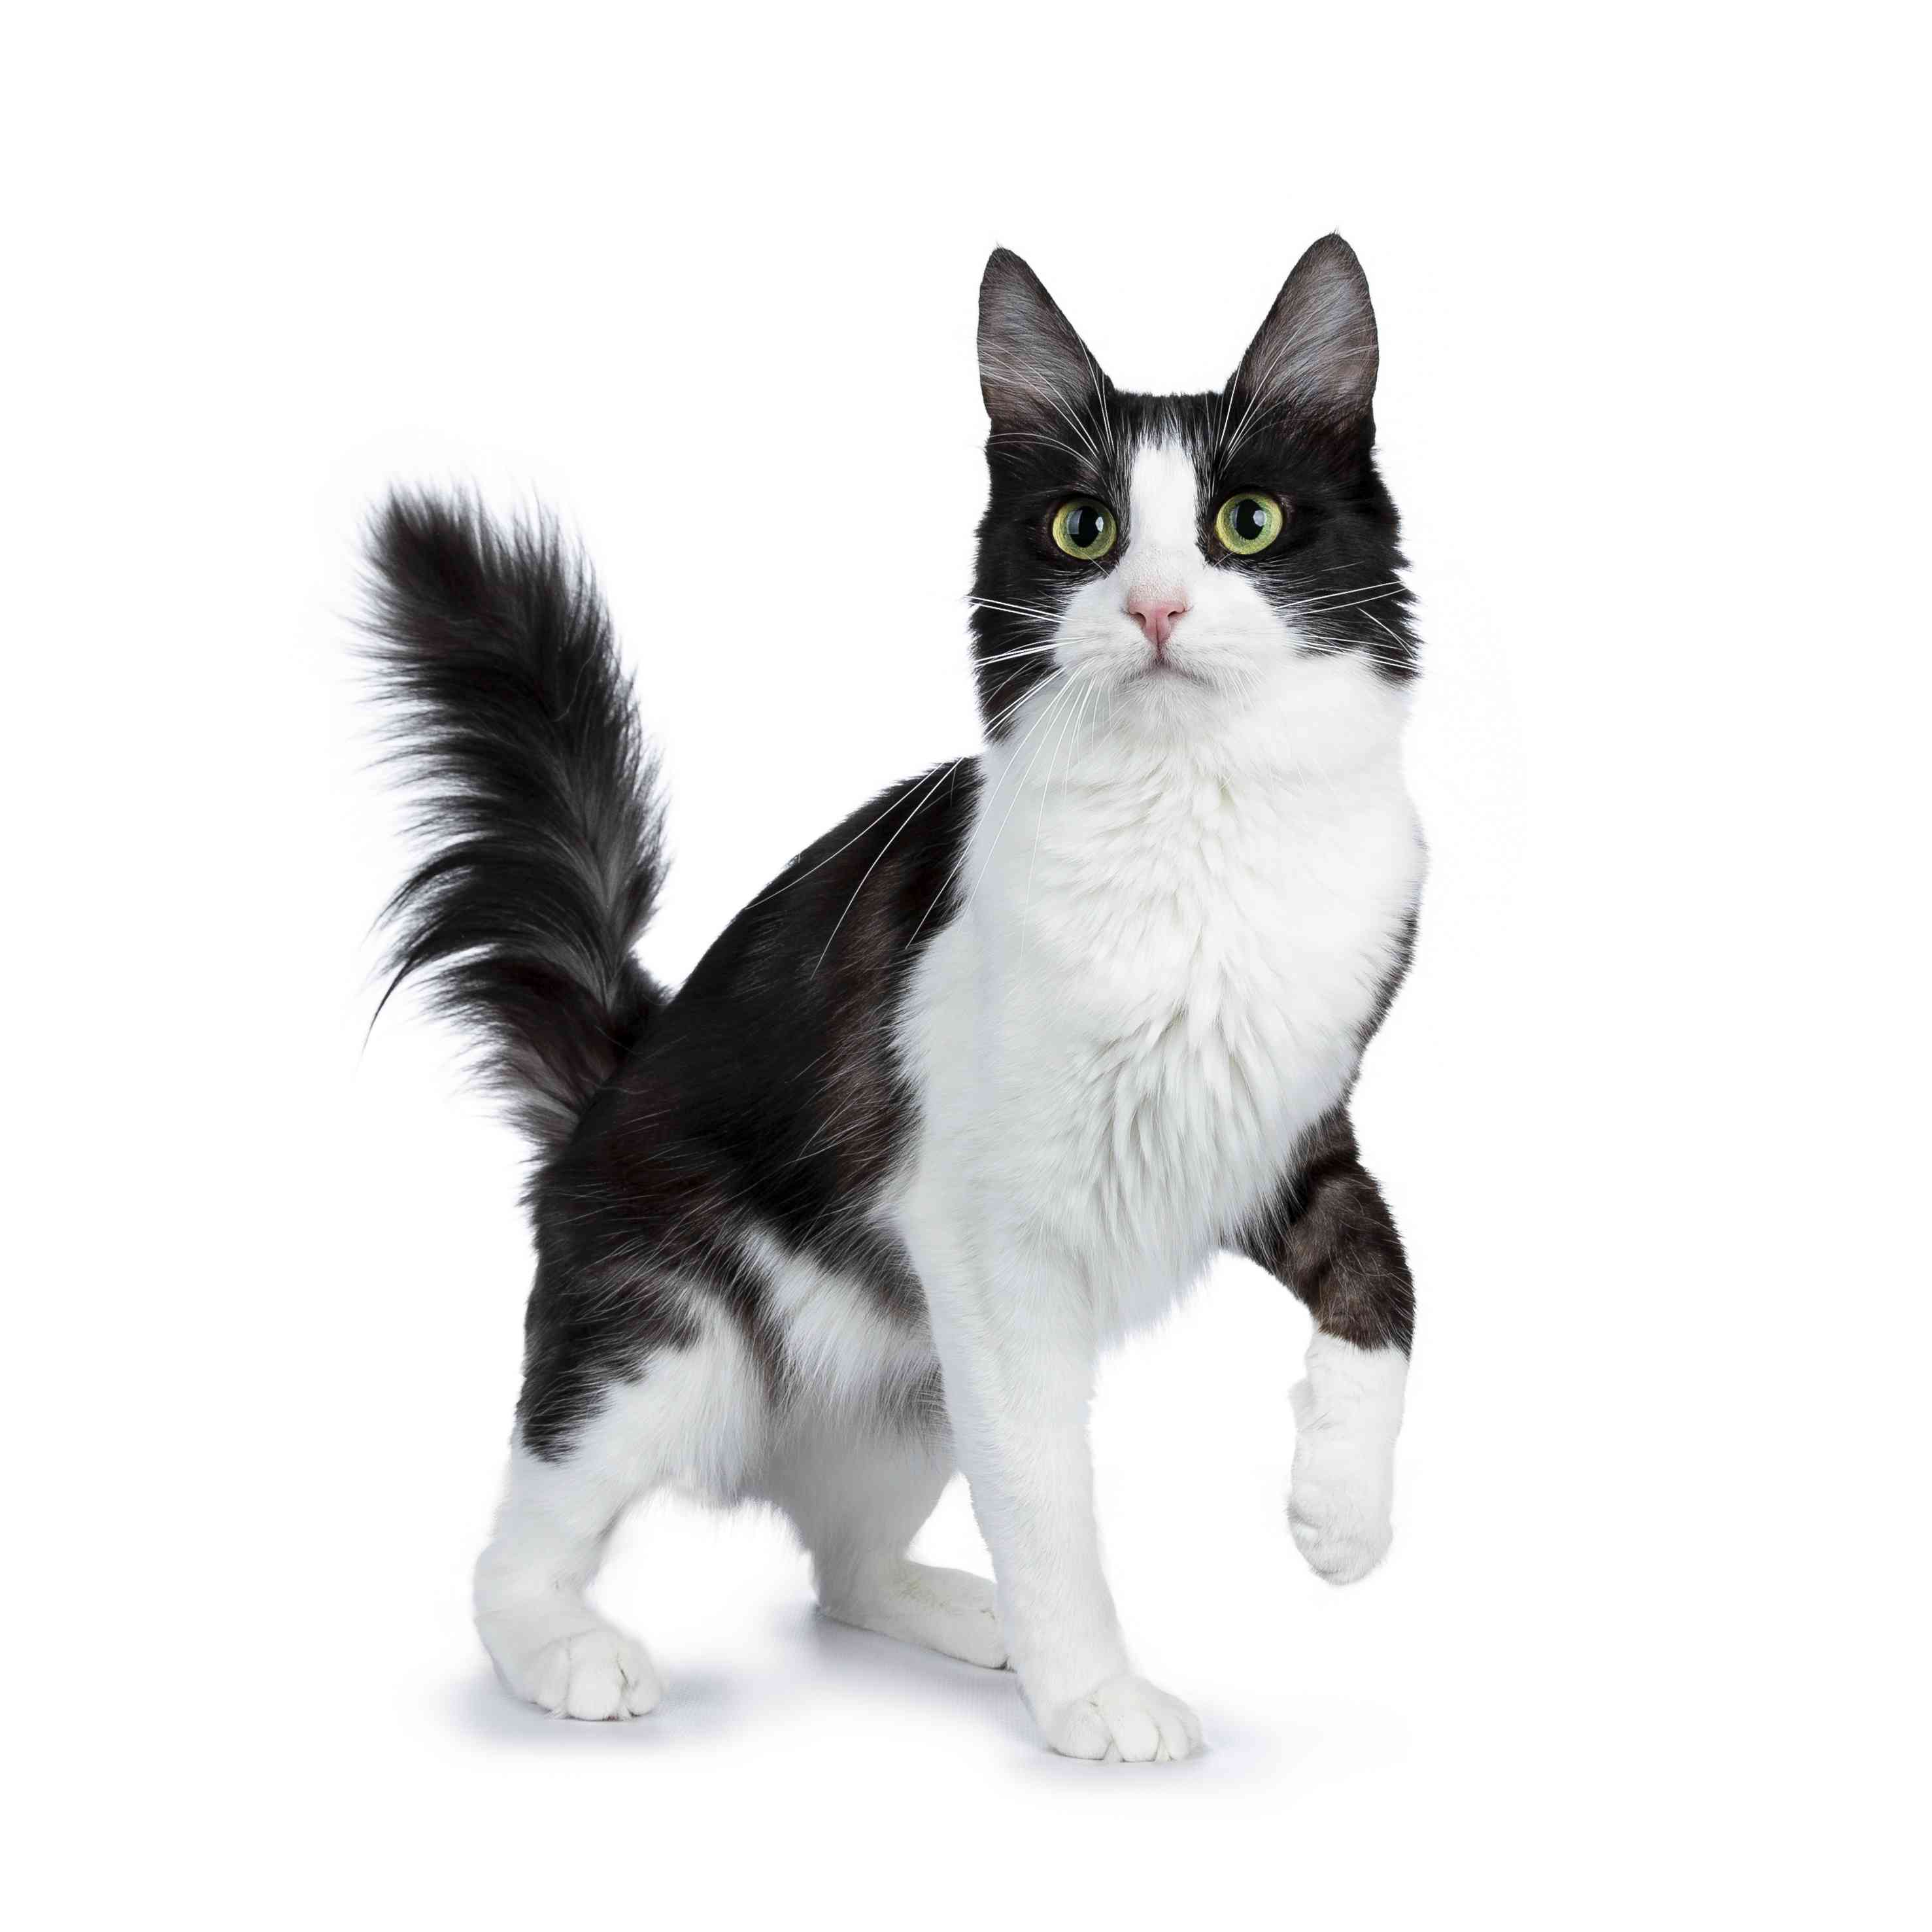 Black and White Turkish Angora standing in front of a white background